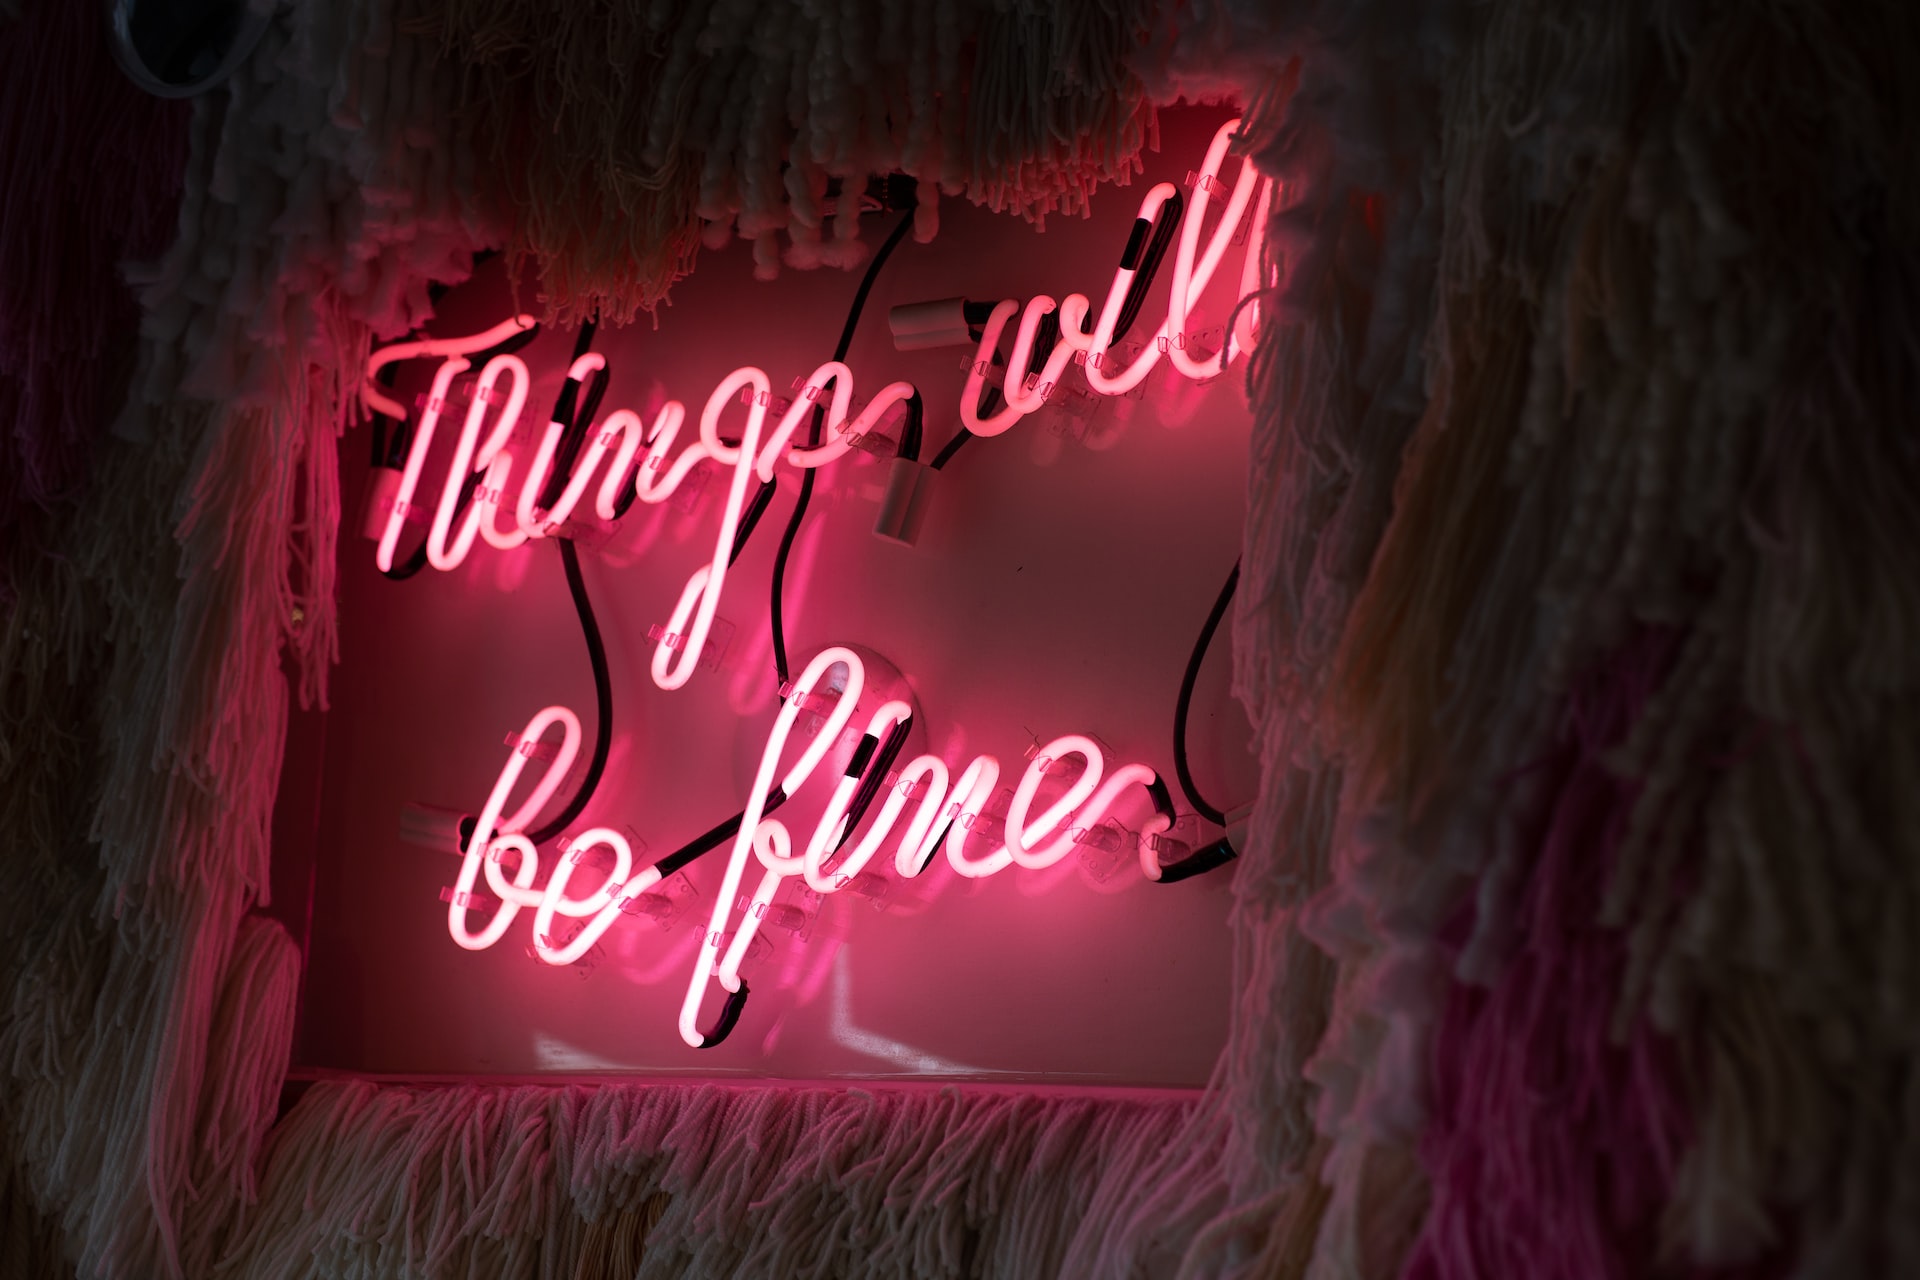 Neon sign that says "Things will be fine".